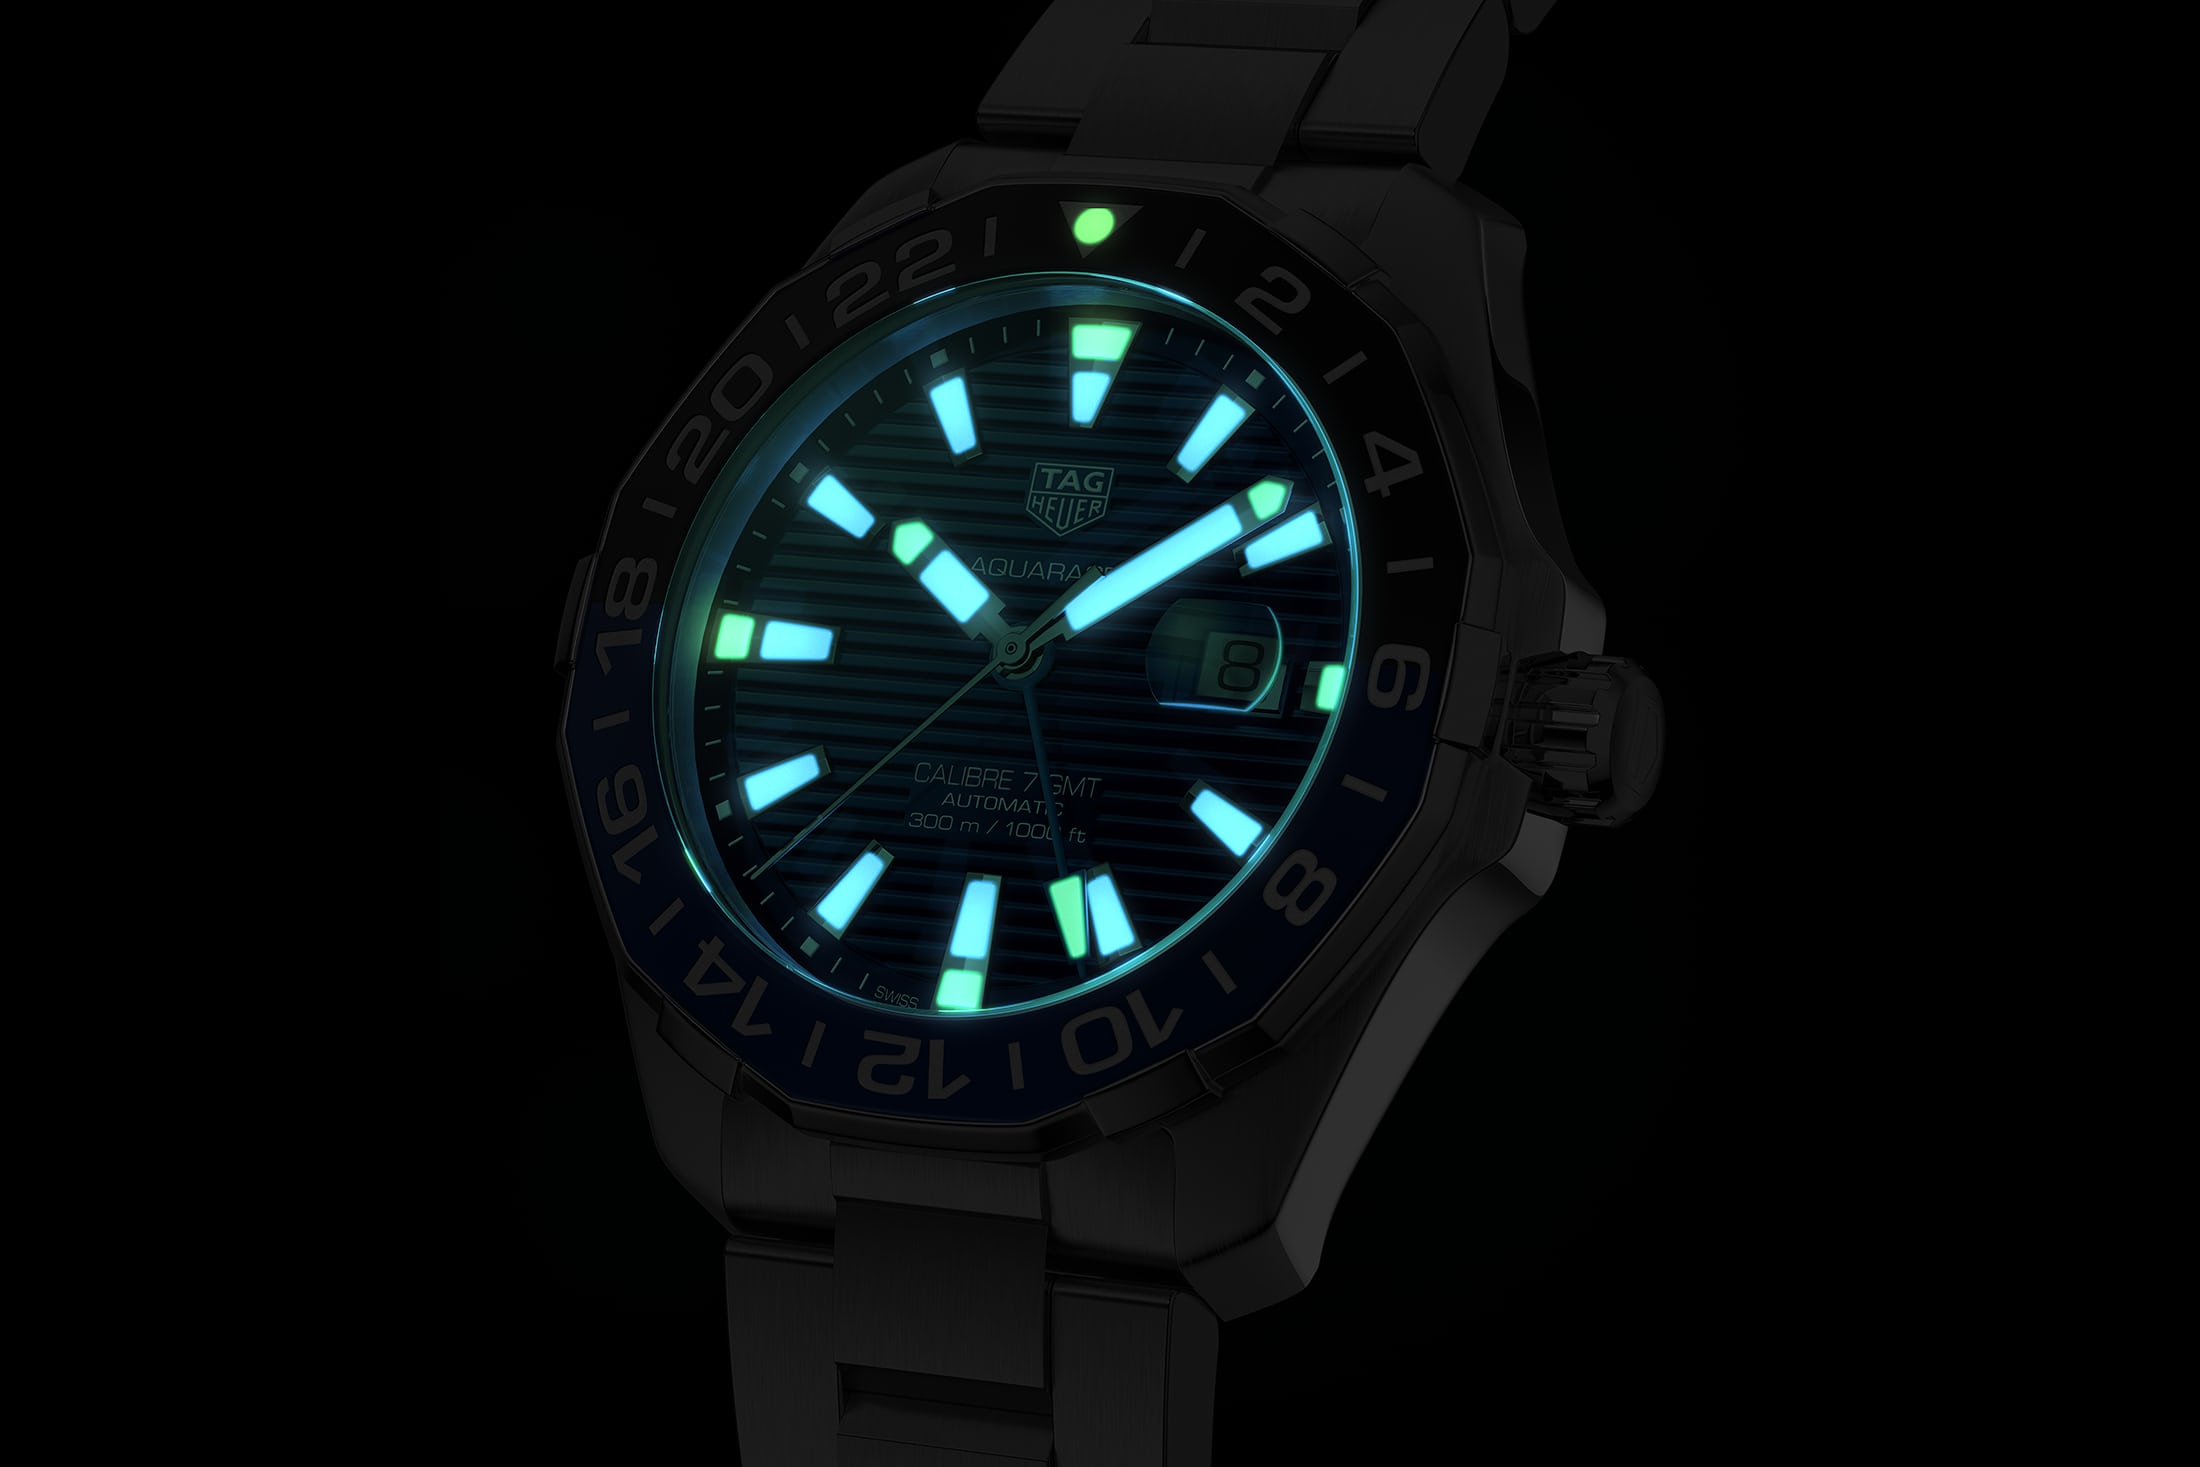 INTRODUCING: The TAG Heuer Aquaracer GMT with black and blue bezel